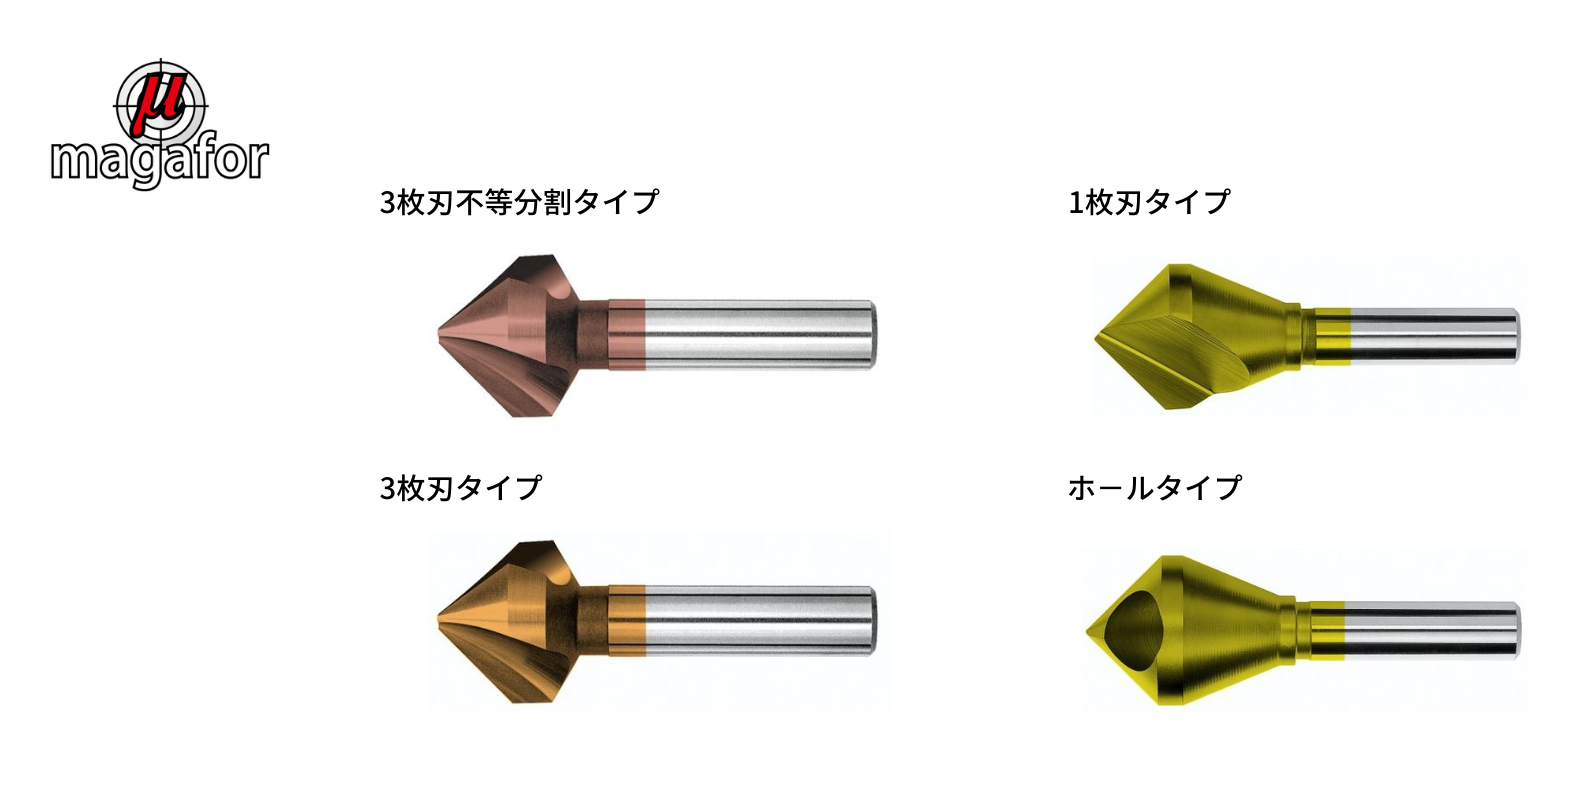 countersink02.png